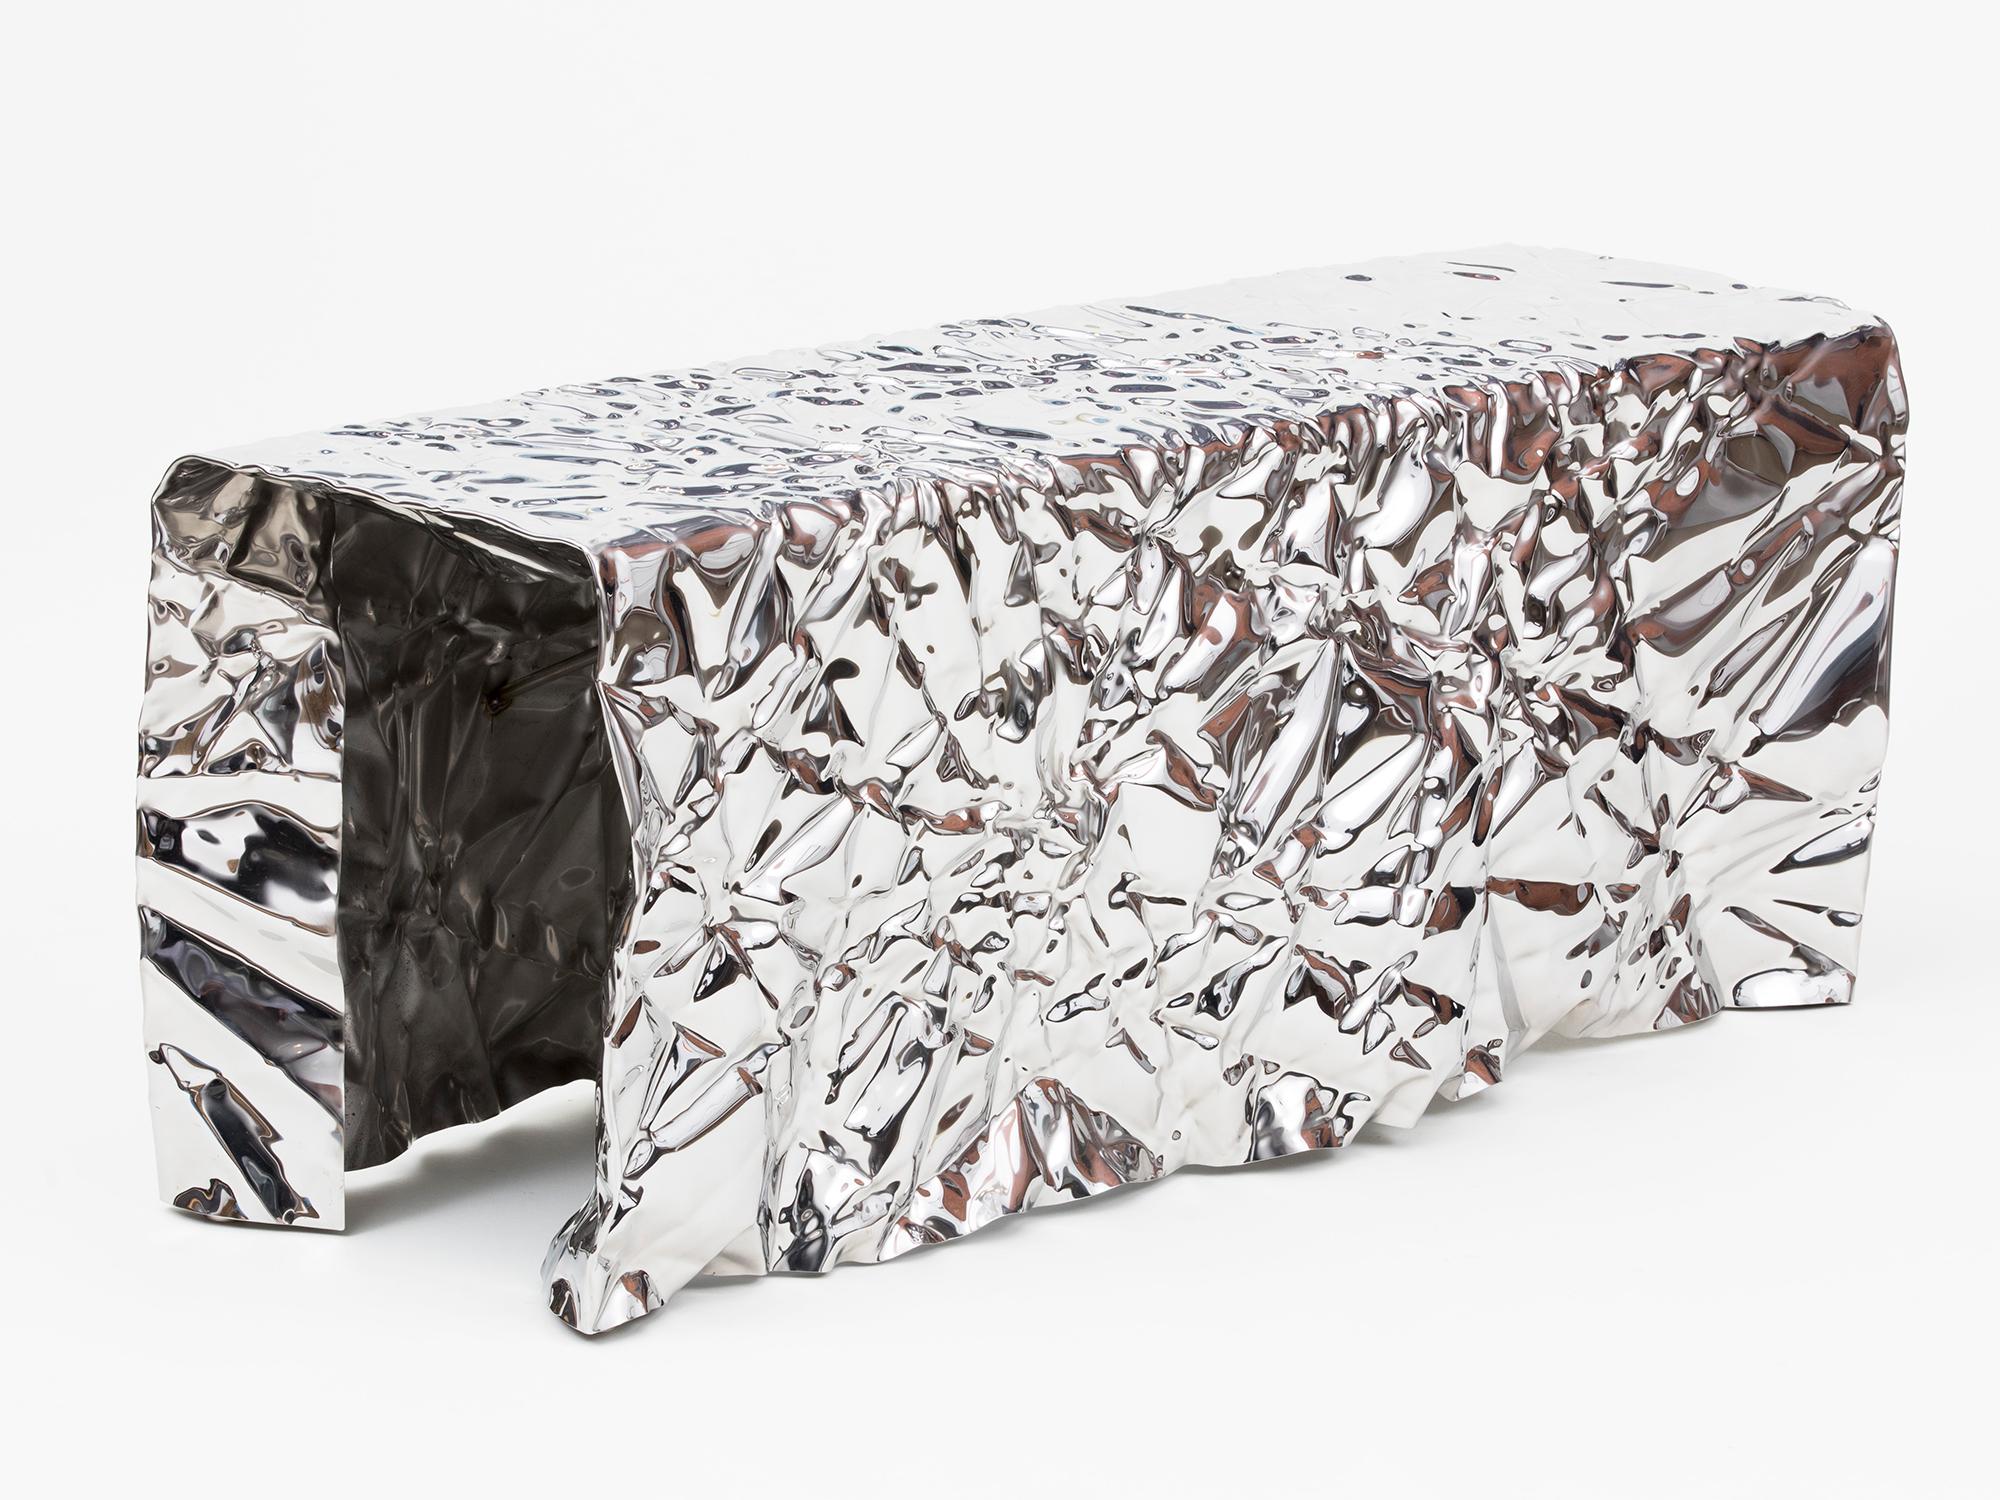 Wrinkled steel bench with a mirror-polished finish by Omaha-based designer Christopher Prinz, who achieves this unusual texture by repeatedly creasing a thin sheet of steel, resulting in a strong, rigid, and unique form. Adapted from an automotive